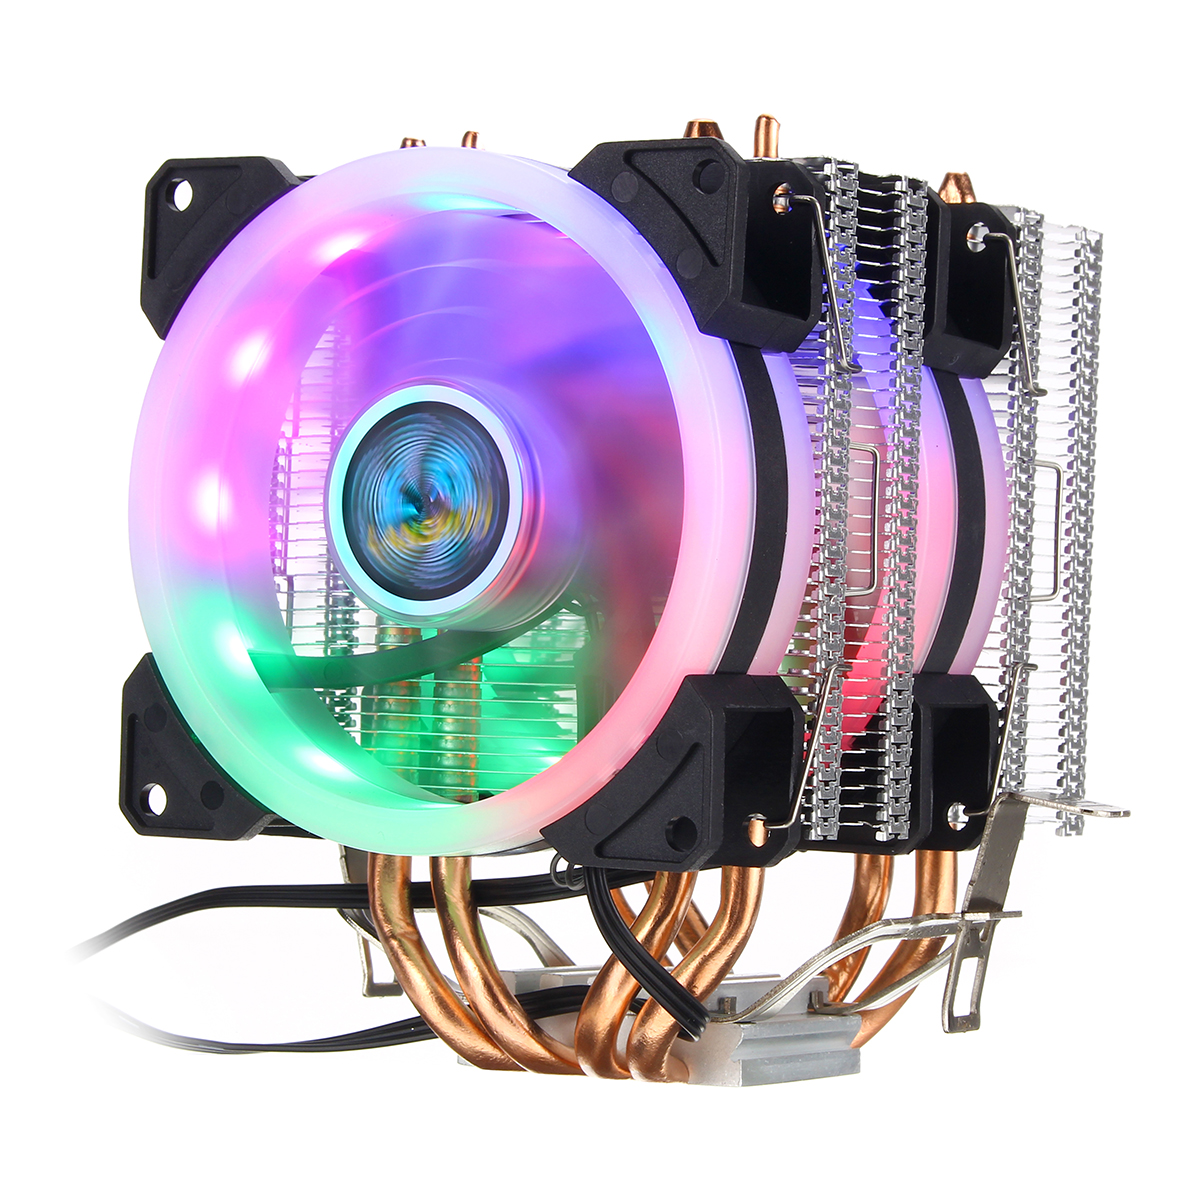 

Aurora Colorful Backlit 3 Pin 2 Fans 4 Copper Tube Dual Tower CPU Cooling Fan Cooler Heatsink for Intel AMD